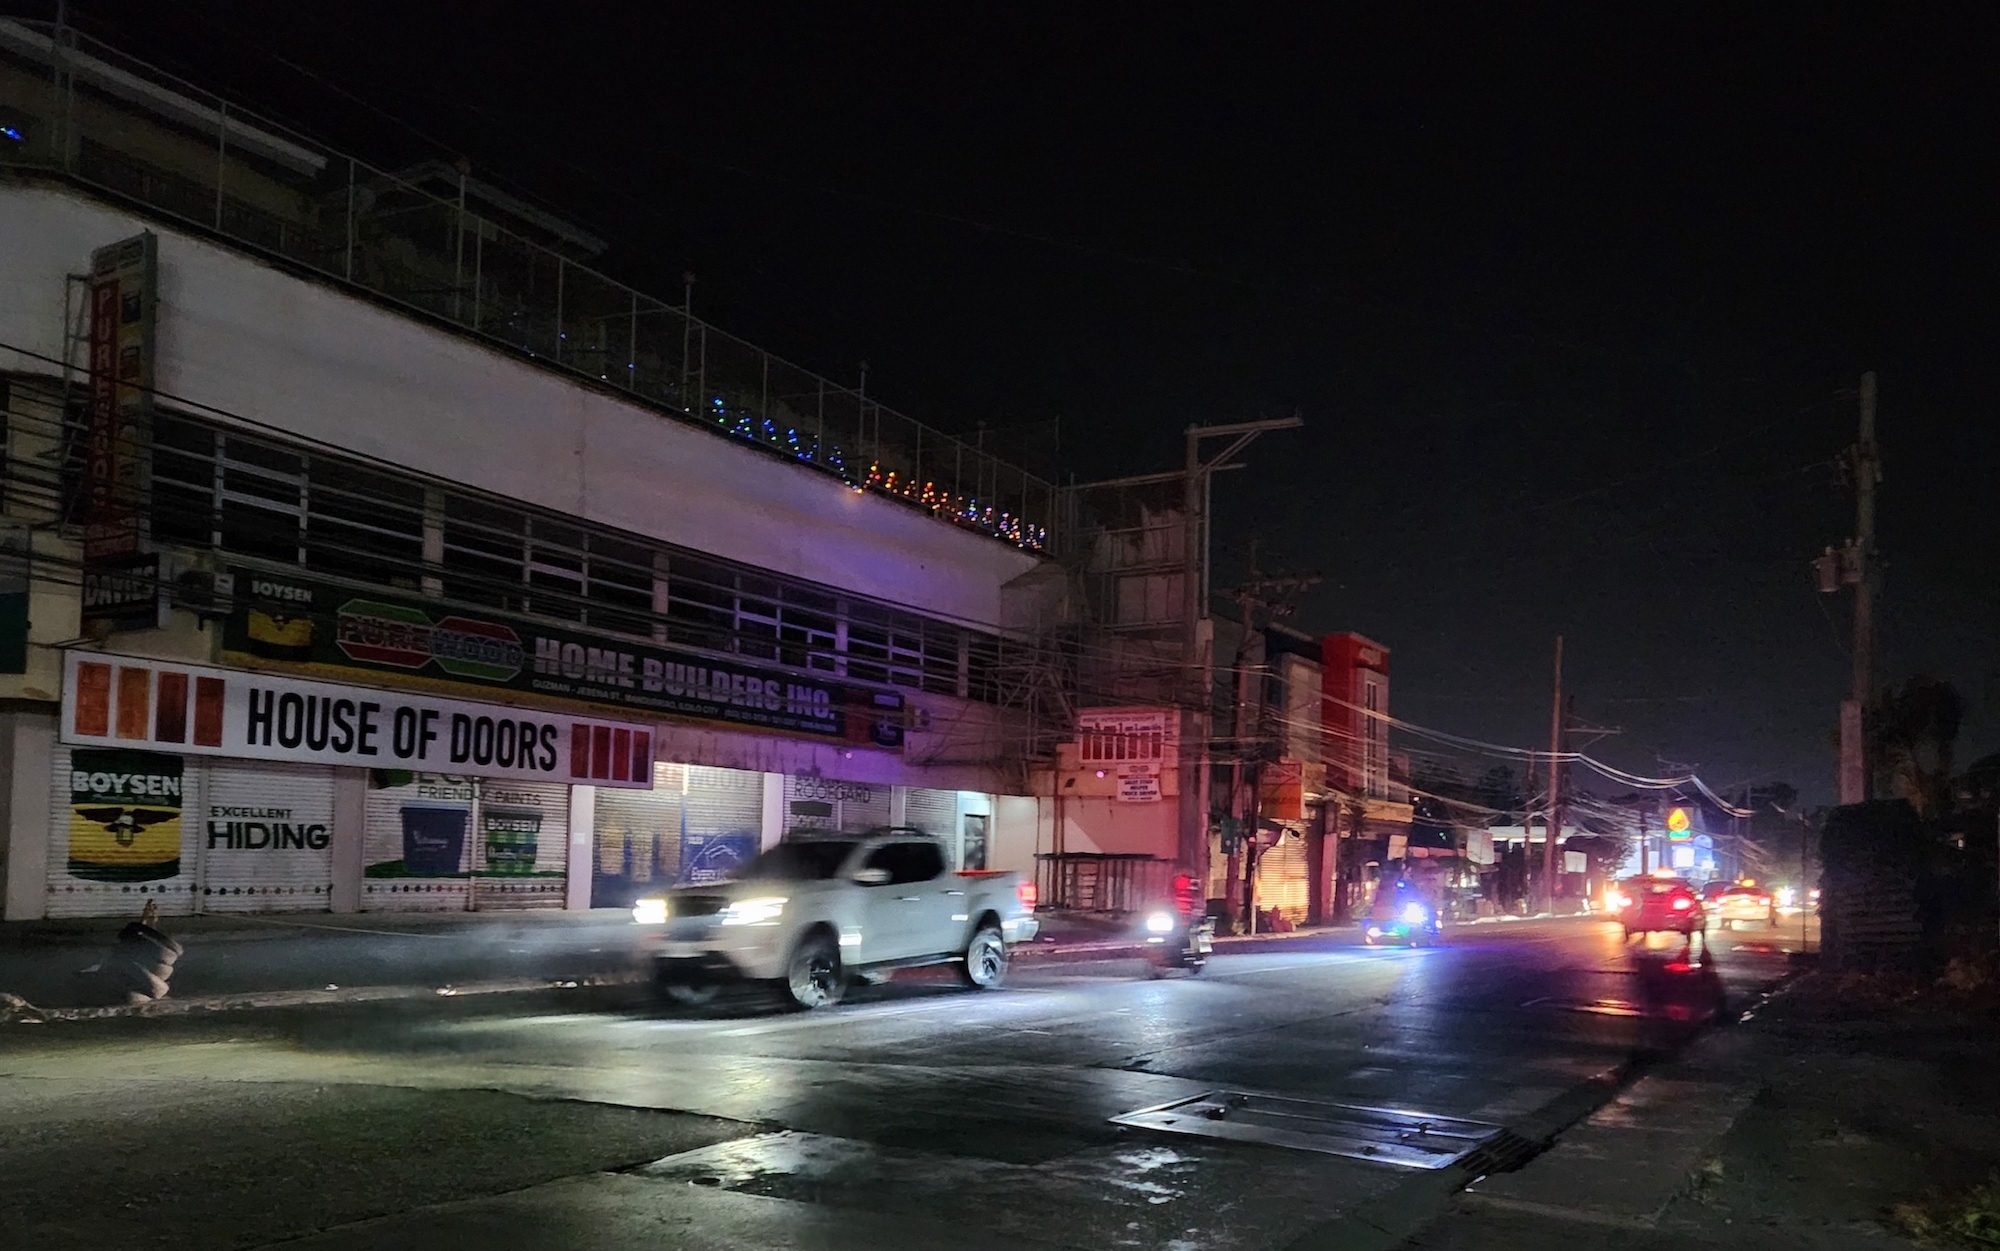 Explainer: power station 'trips' are normal, but blackouts are not